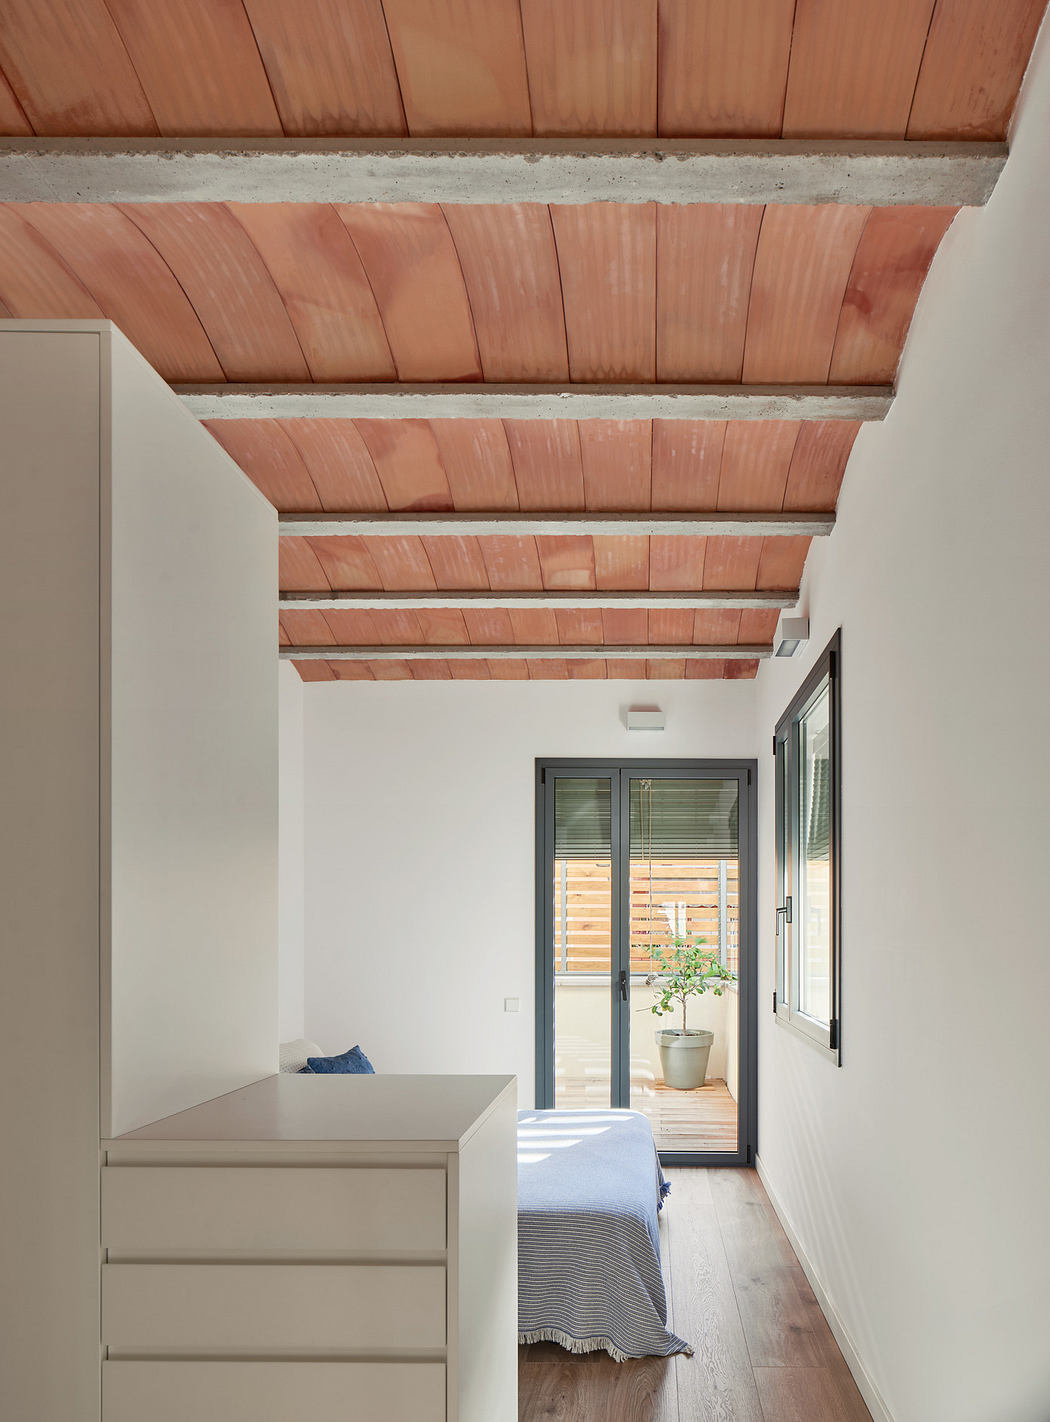 Minimalist bedroom with terracotta ceiling beams, white walls, and a door